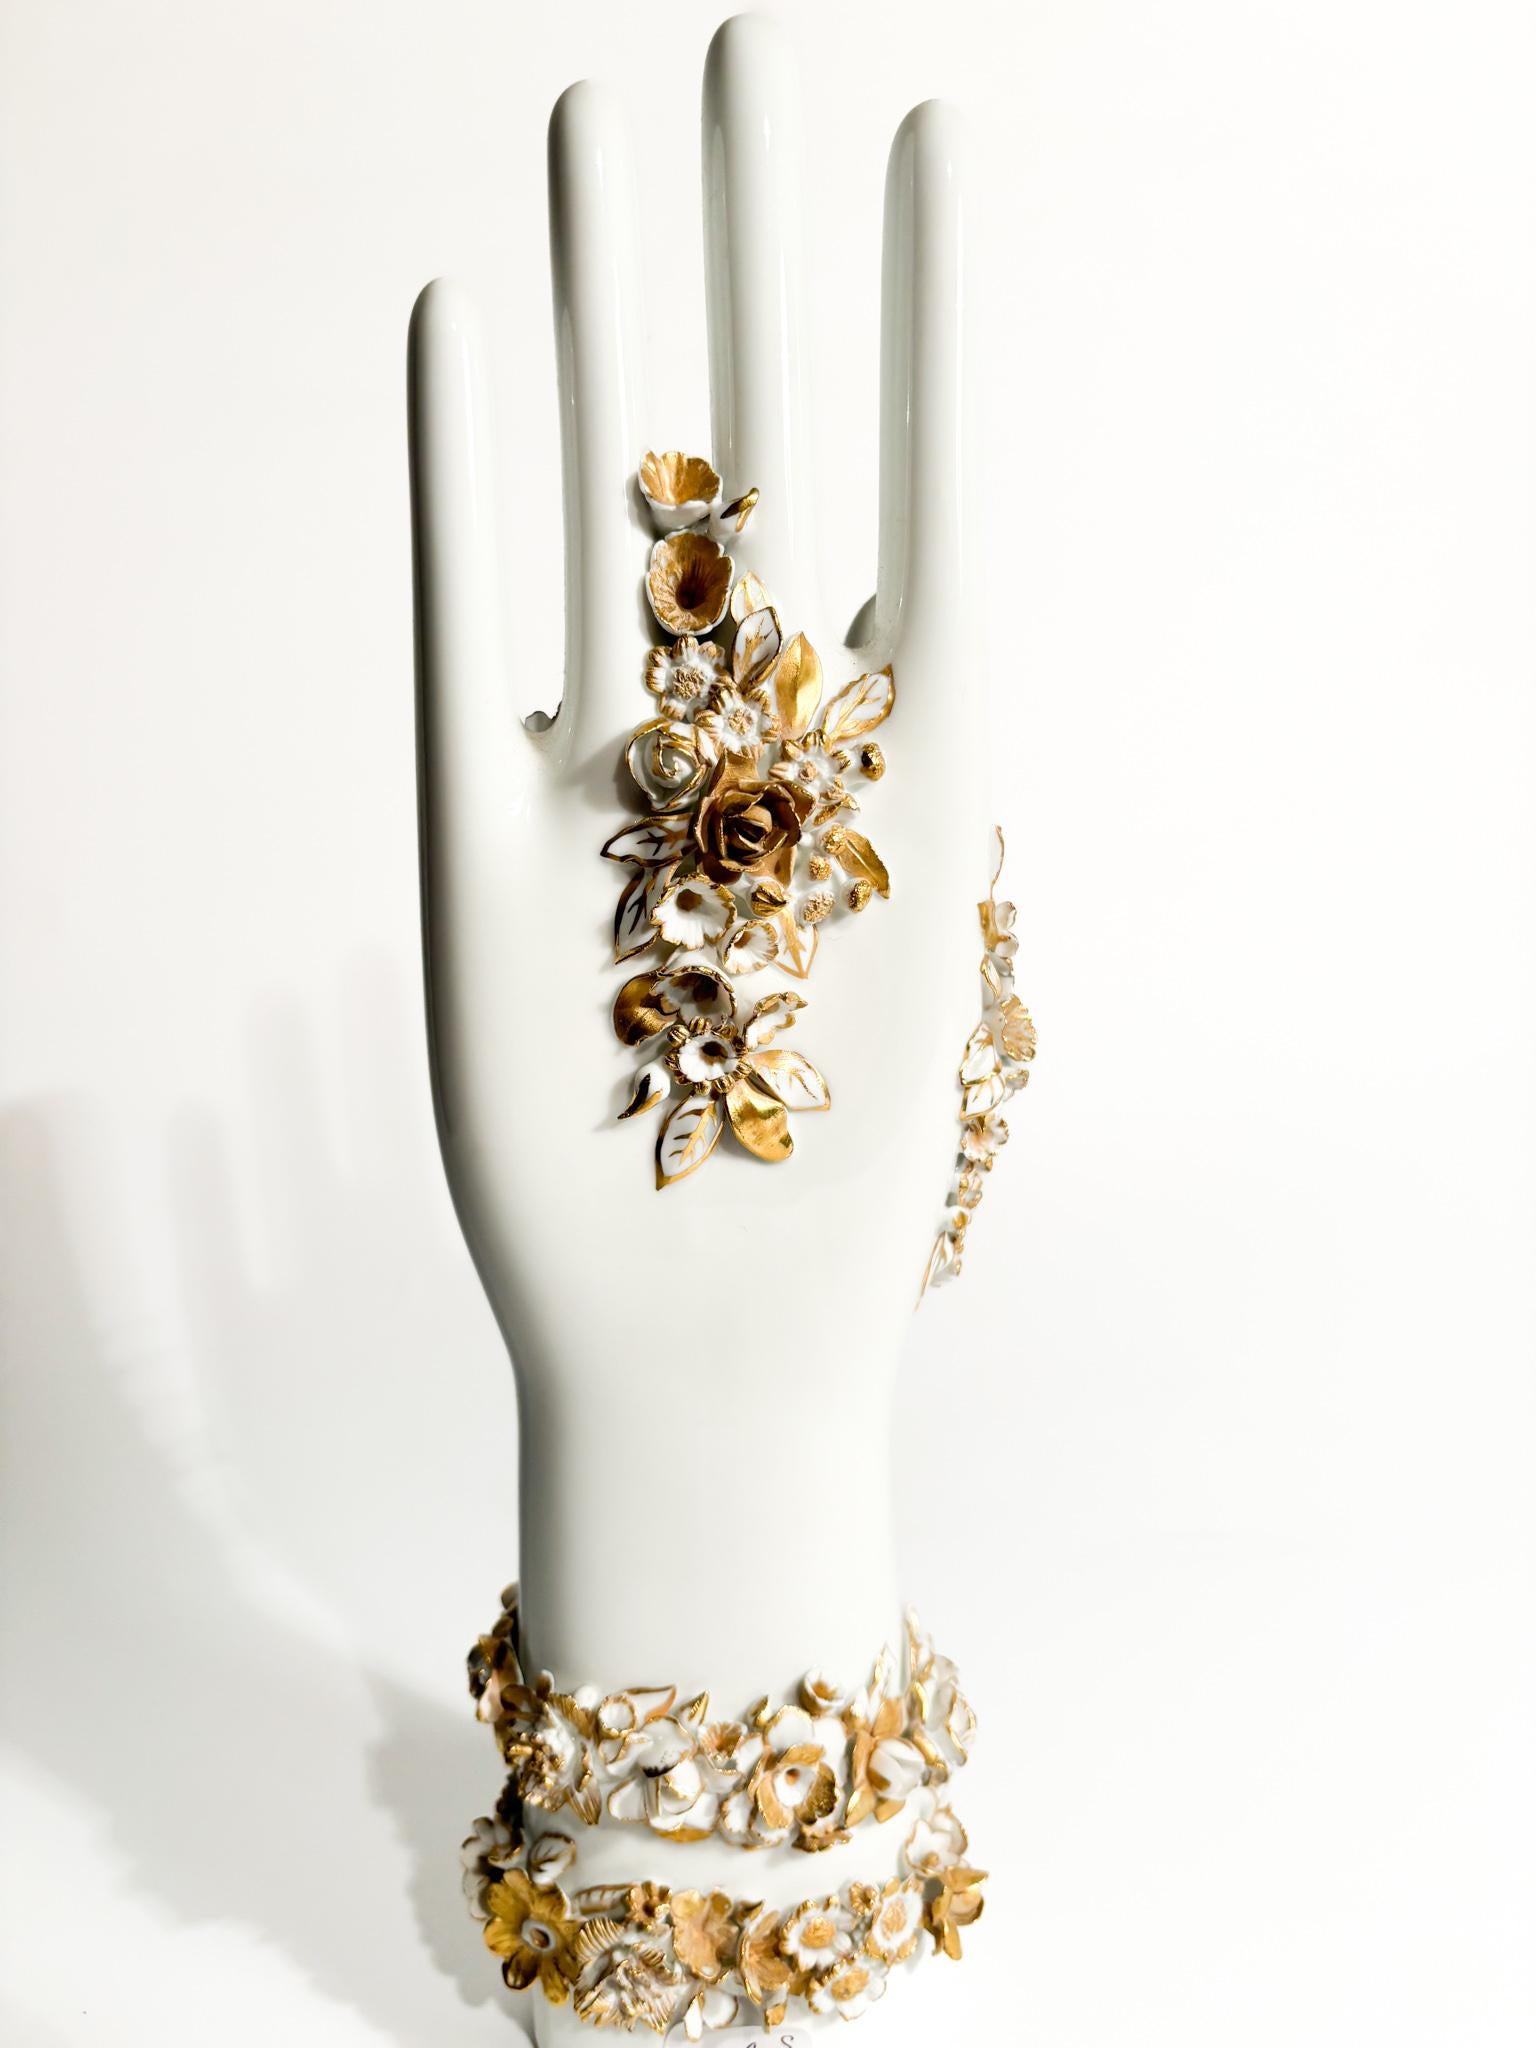 Ponti White and Gold Flowered Hand Art by Gio Ponti for Richard Ginori 1980s For Sale 4